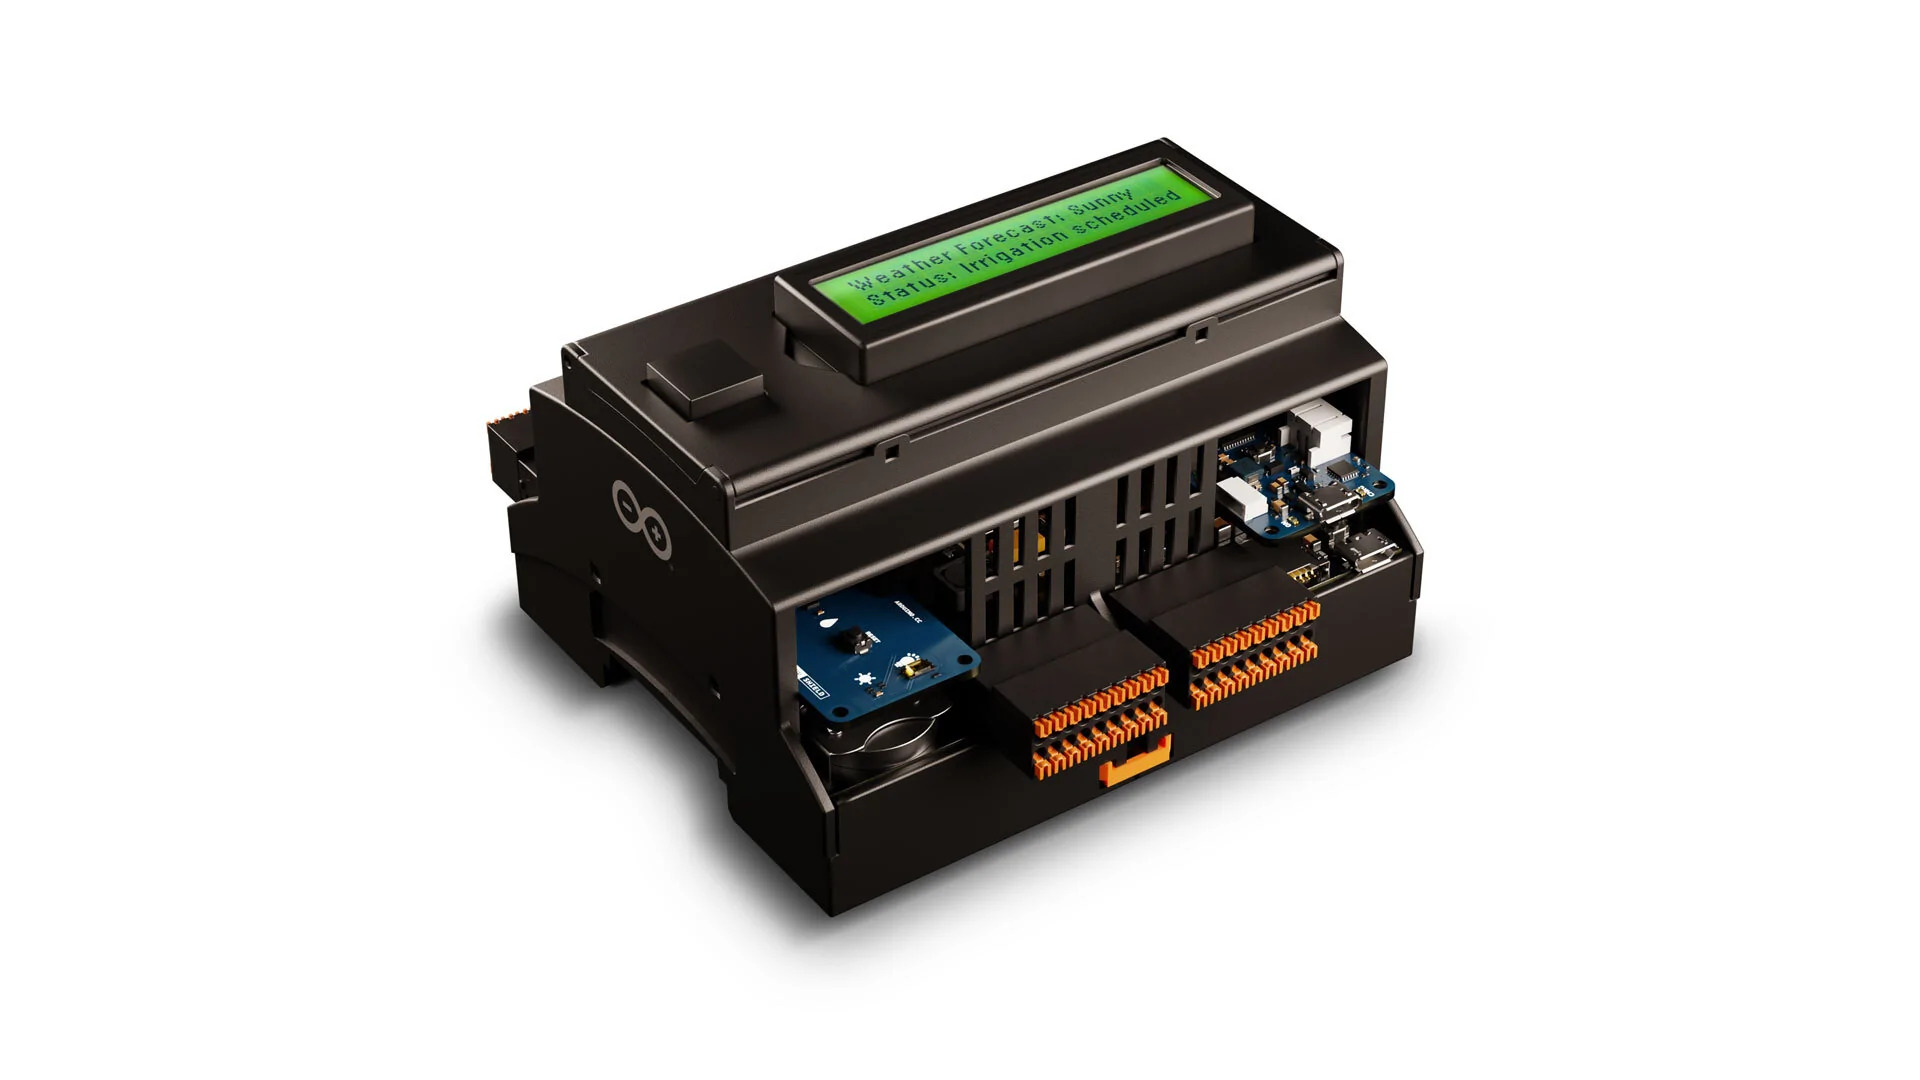 Arduino Edge Control Enclosure Kit is IP40-certified and fits DIN rail